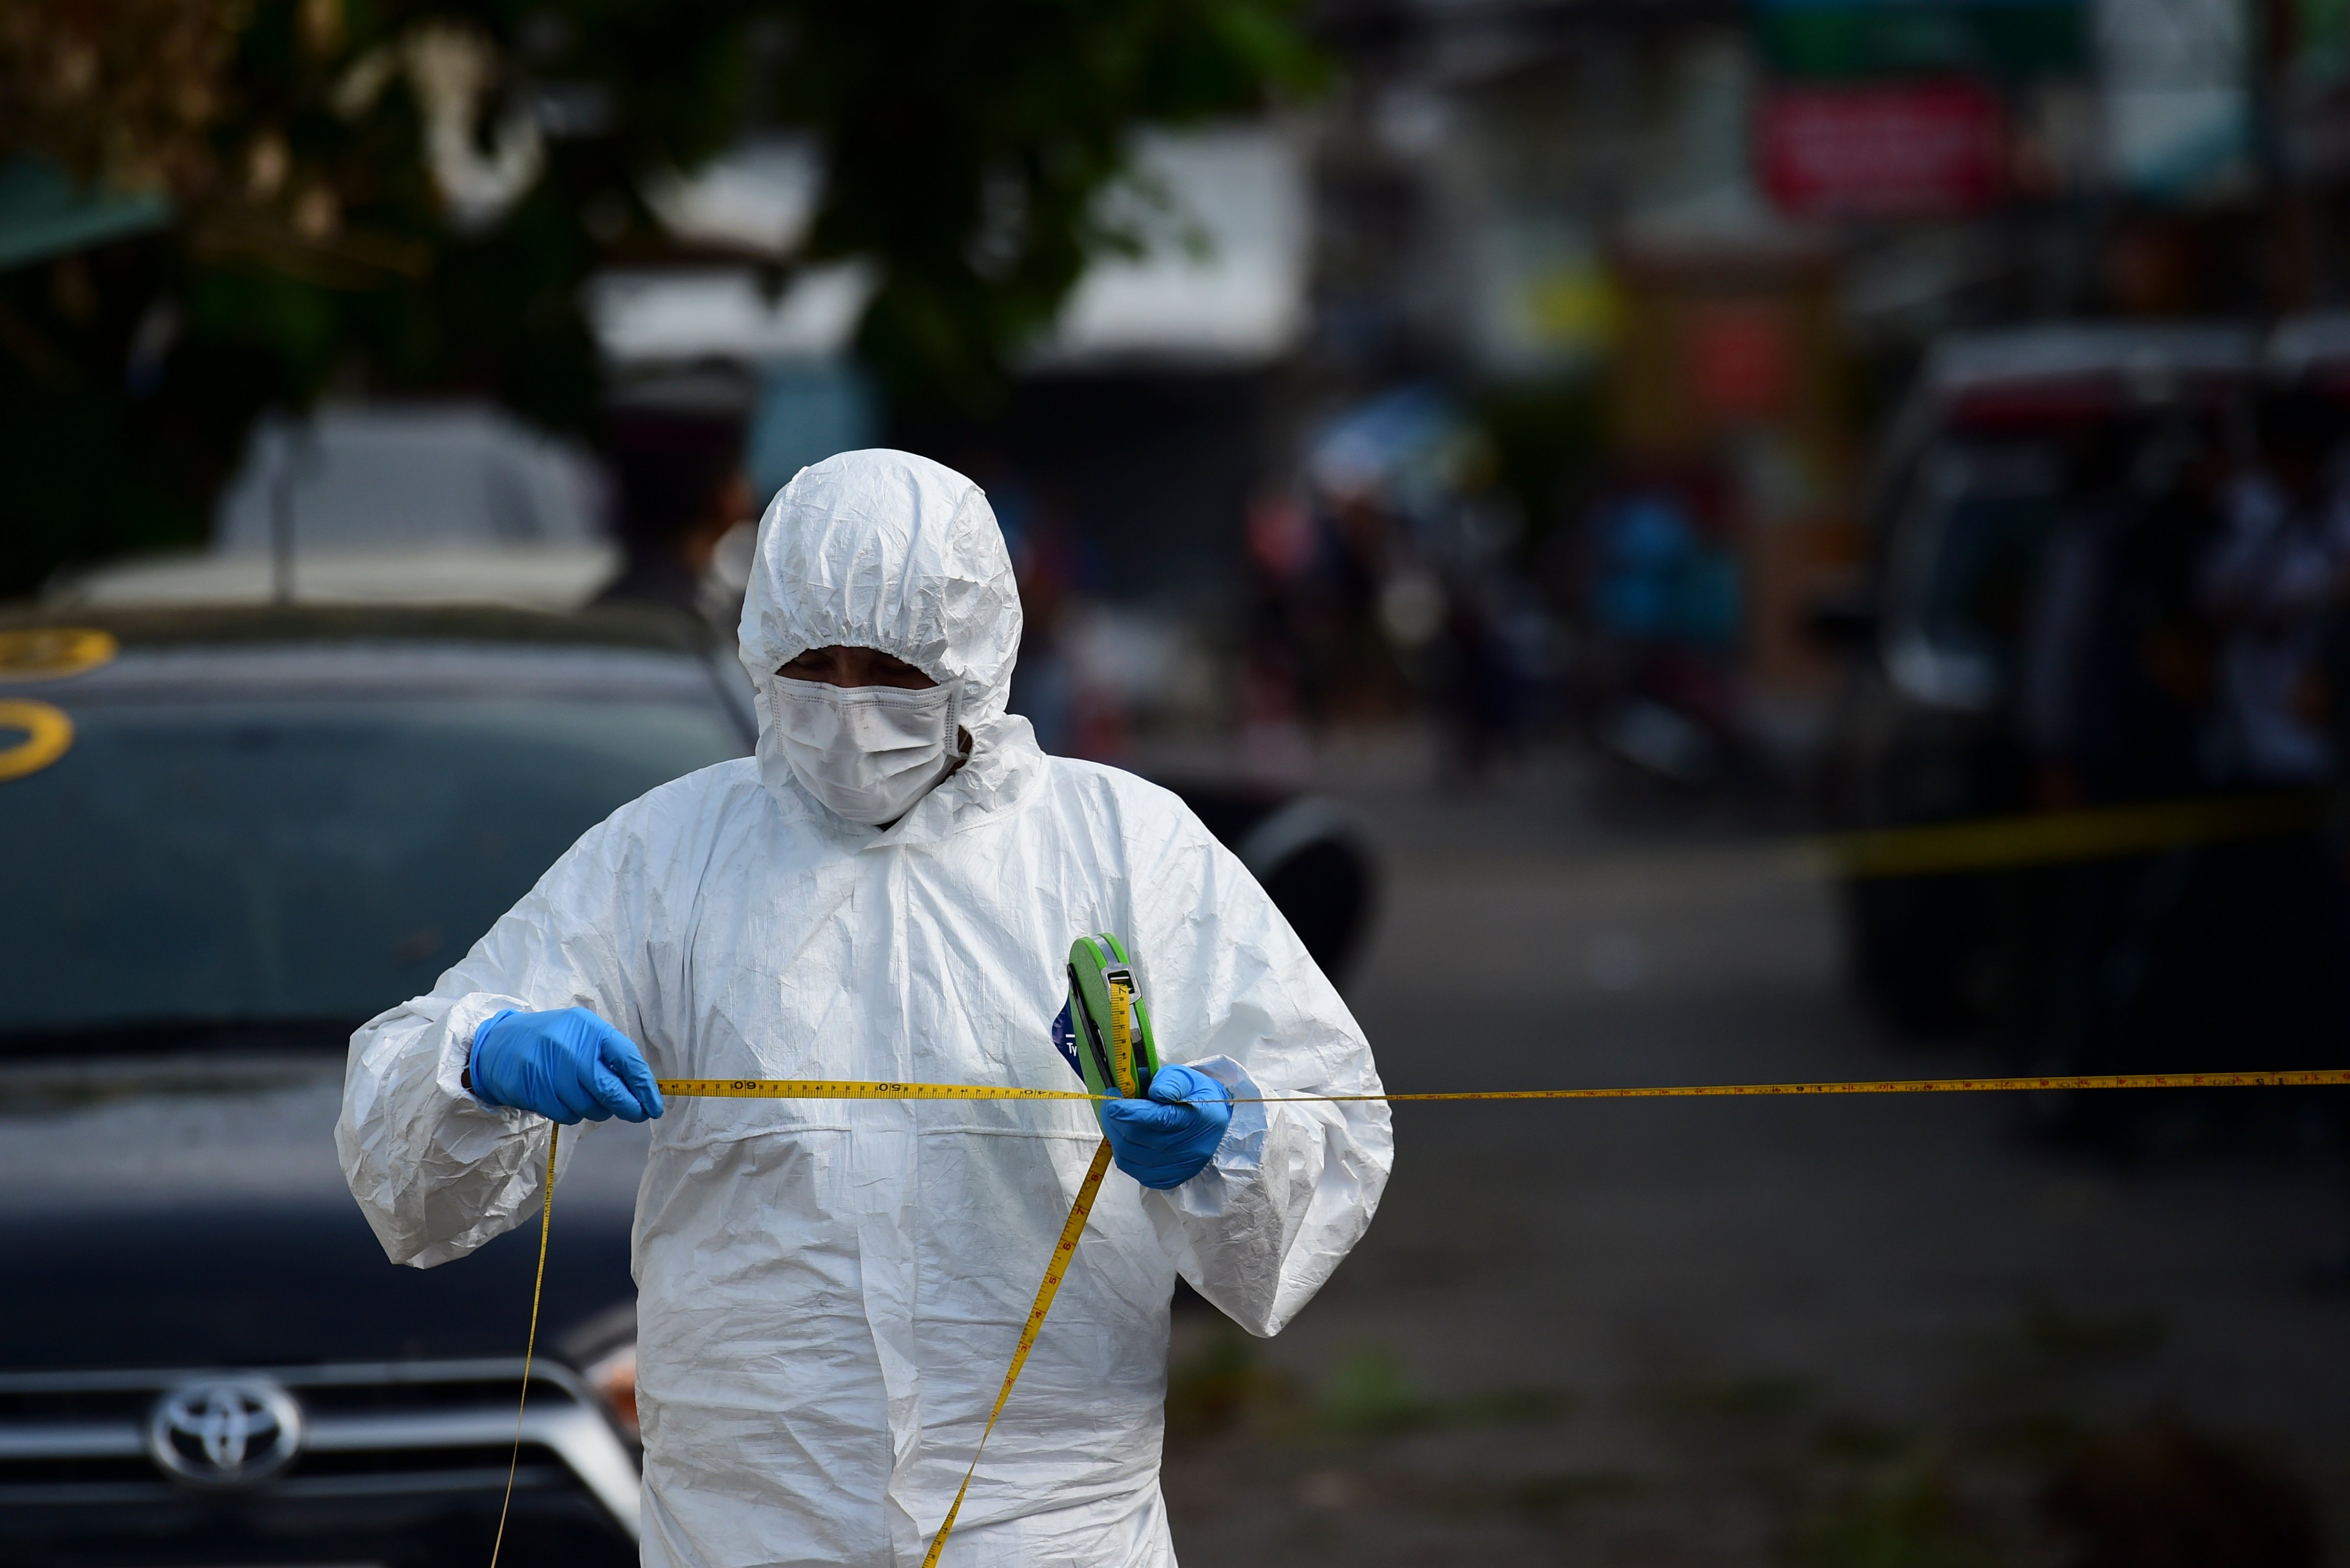 An investigation official collects evidence from the crime scene after a small bomb exploded in Hua Hin, Thailand, on Aug. 12, 2016 (Munir Uz Zaman—AFP/Getty Images)